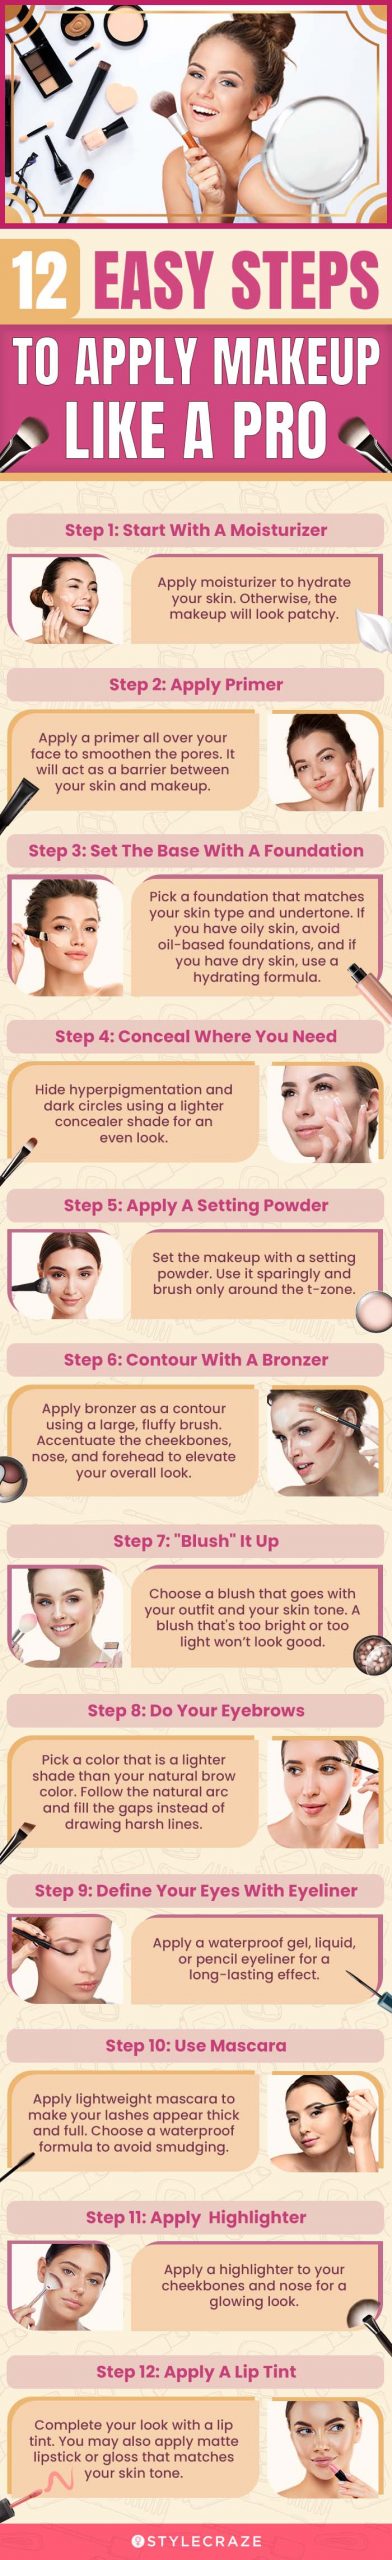 12 easy steps to apply makeup like a pro (infographic)